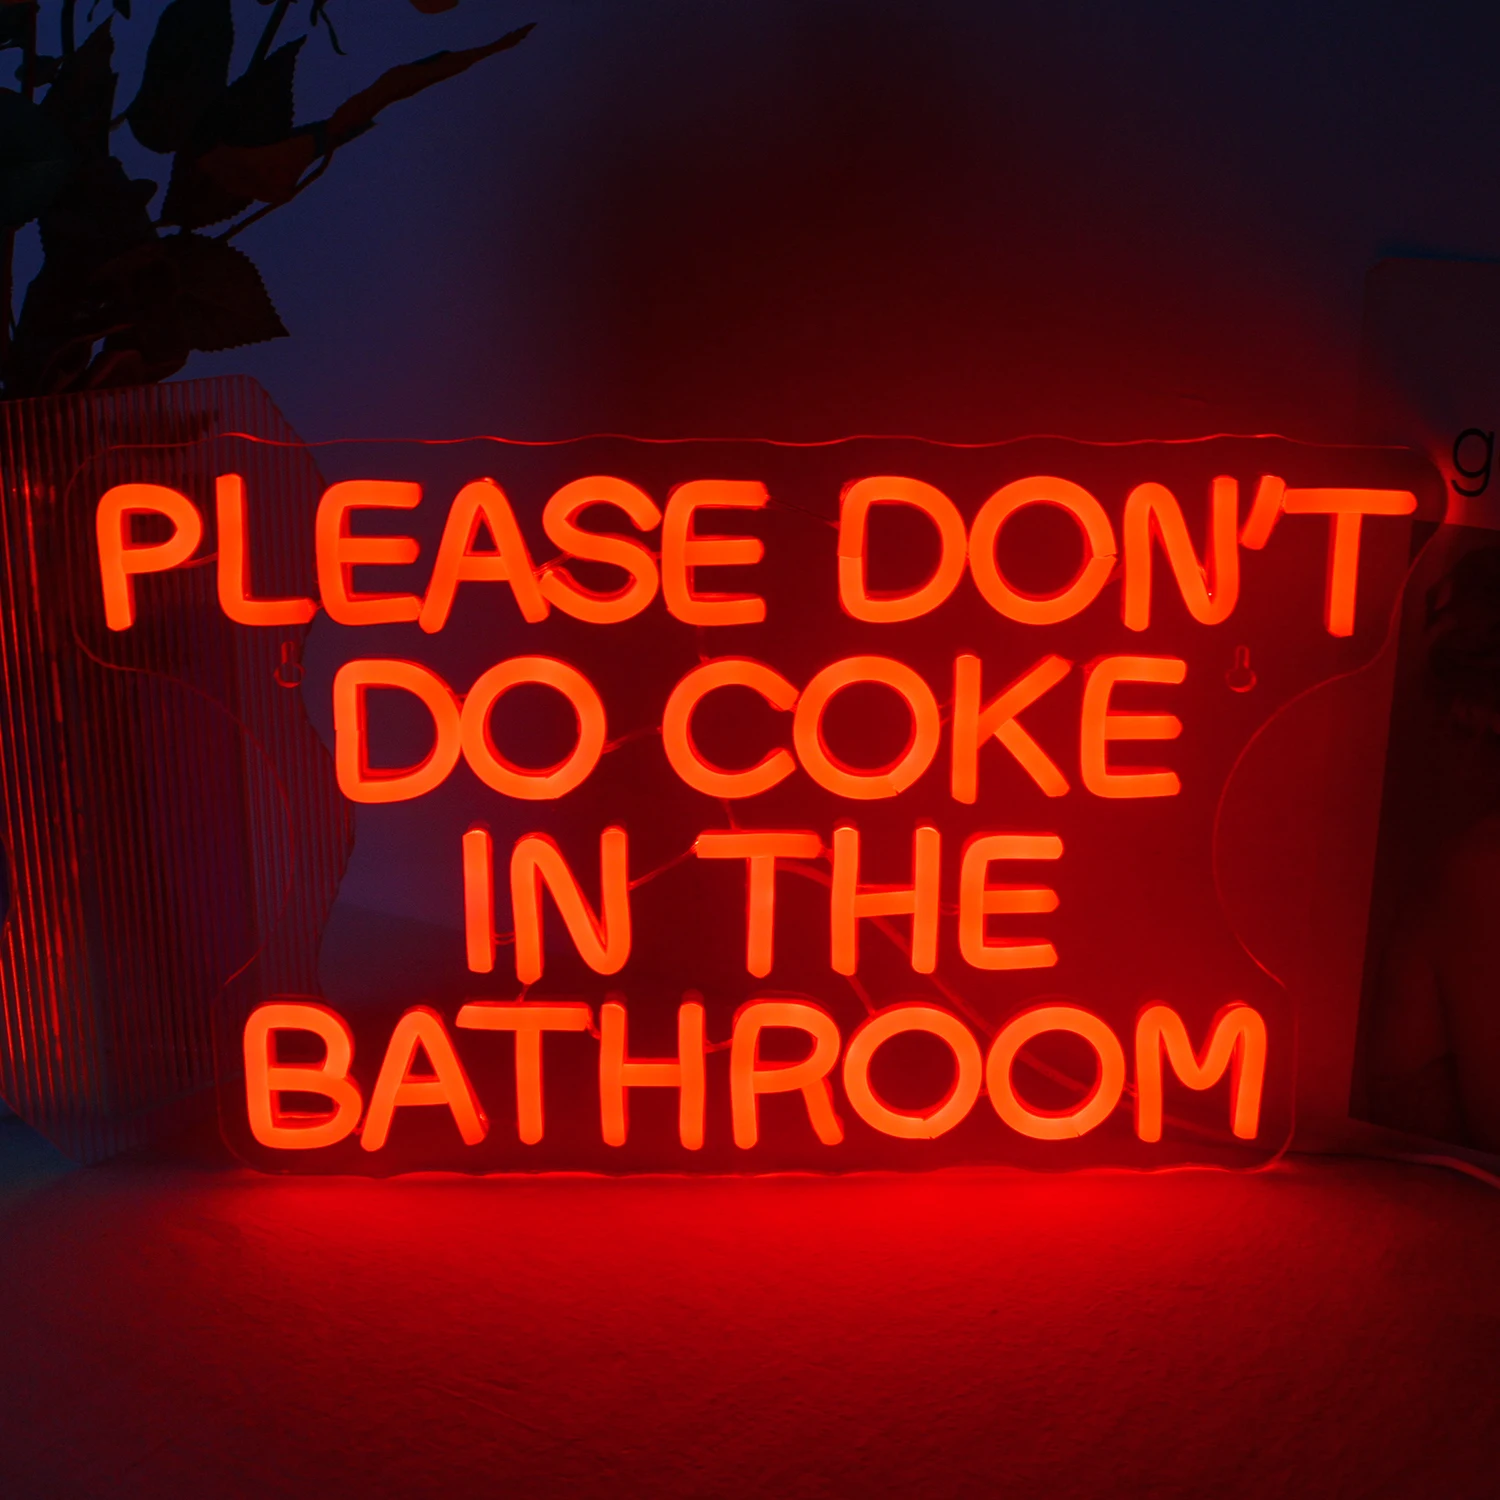 

Please Don’t Do Coke In The Bathroom Neon Signs LED Lights Up Sign USB Bedroom Home Bars Club Party Art Wall Decor Birthday Lamp